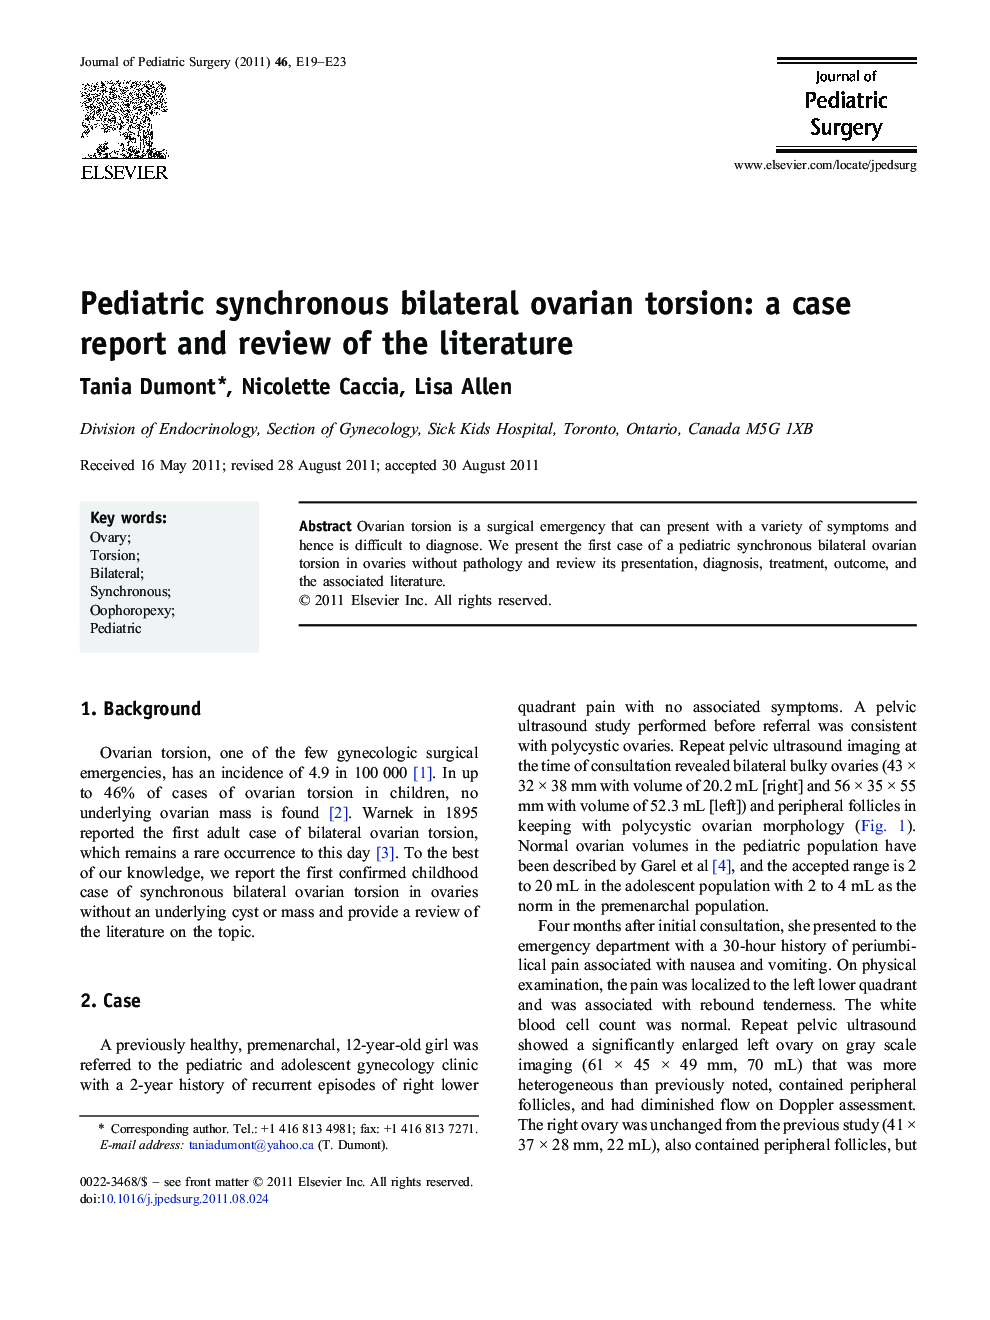 Pediatric synchronous bilateral ovarian torsion: a case report and review of the literature